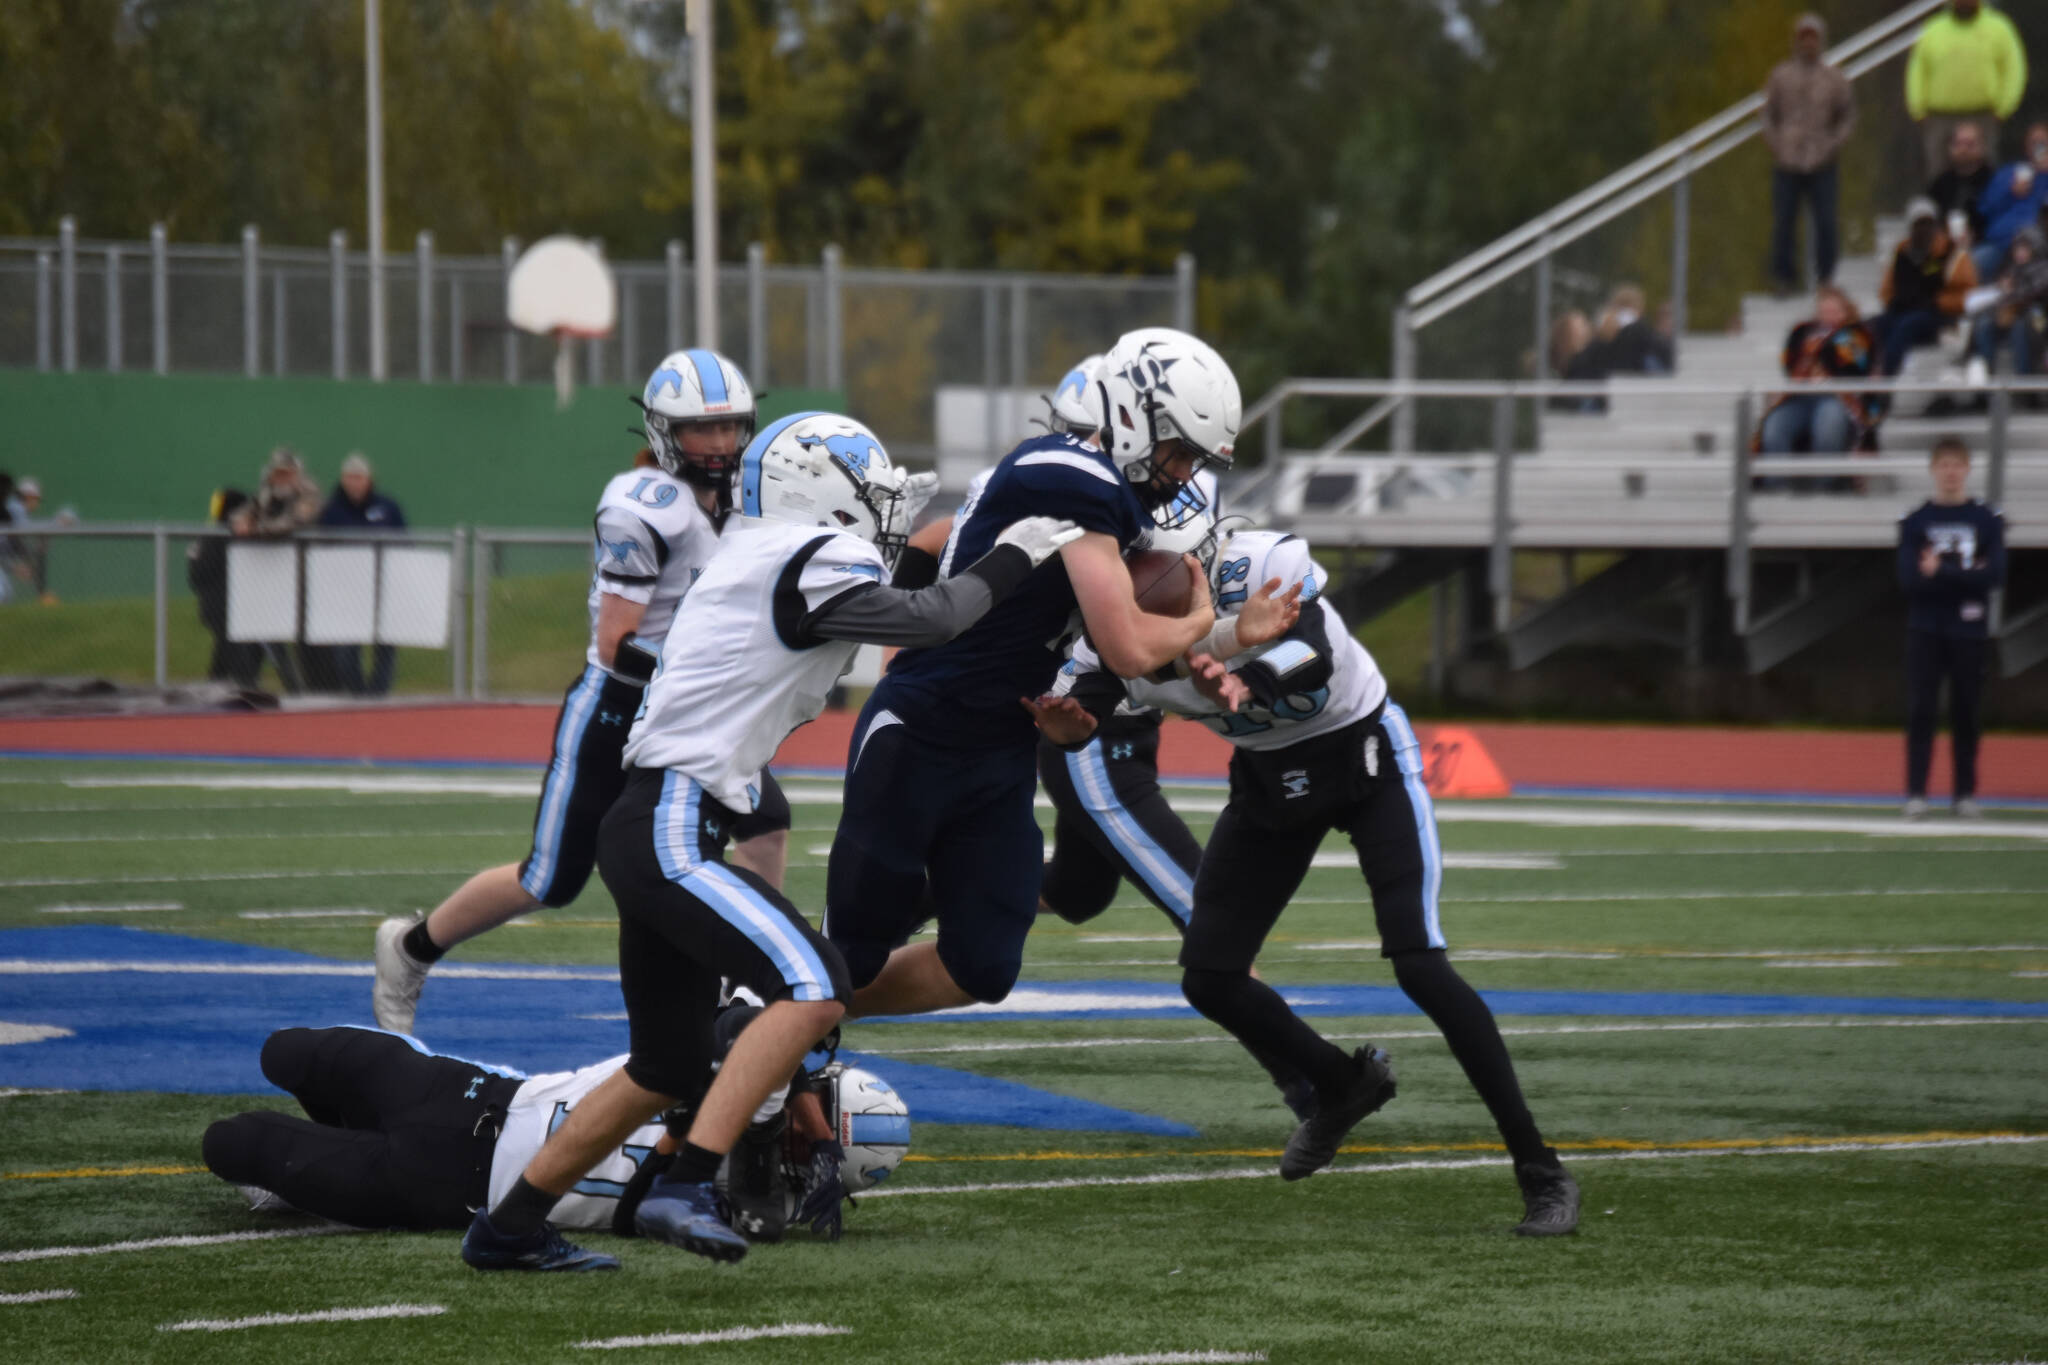 Zac Buckbee holds the ball while trying to push through Chugiak defenders at Justin Maile Field in Soldotna, Alaska on Sept. 9, 2022 (Jake Dye/Peninsula Clarion)